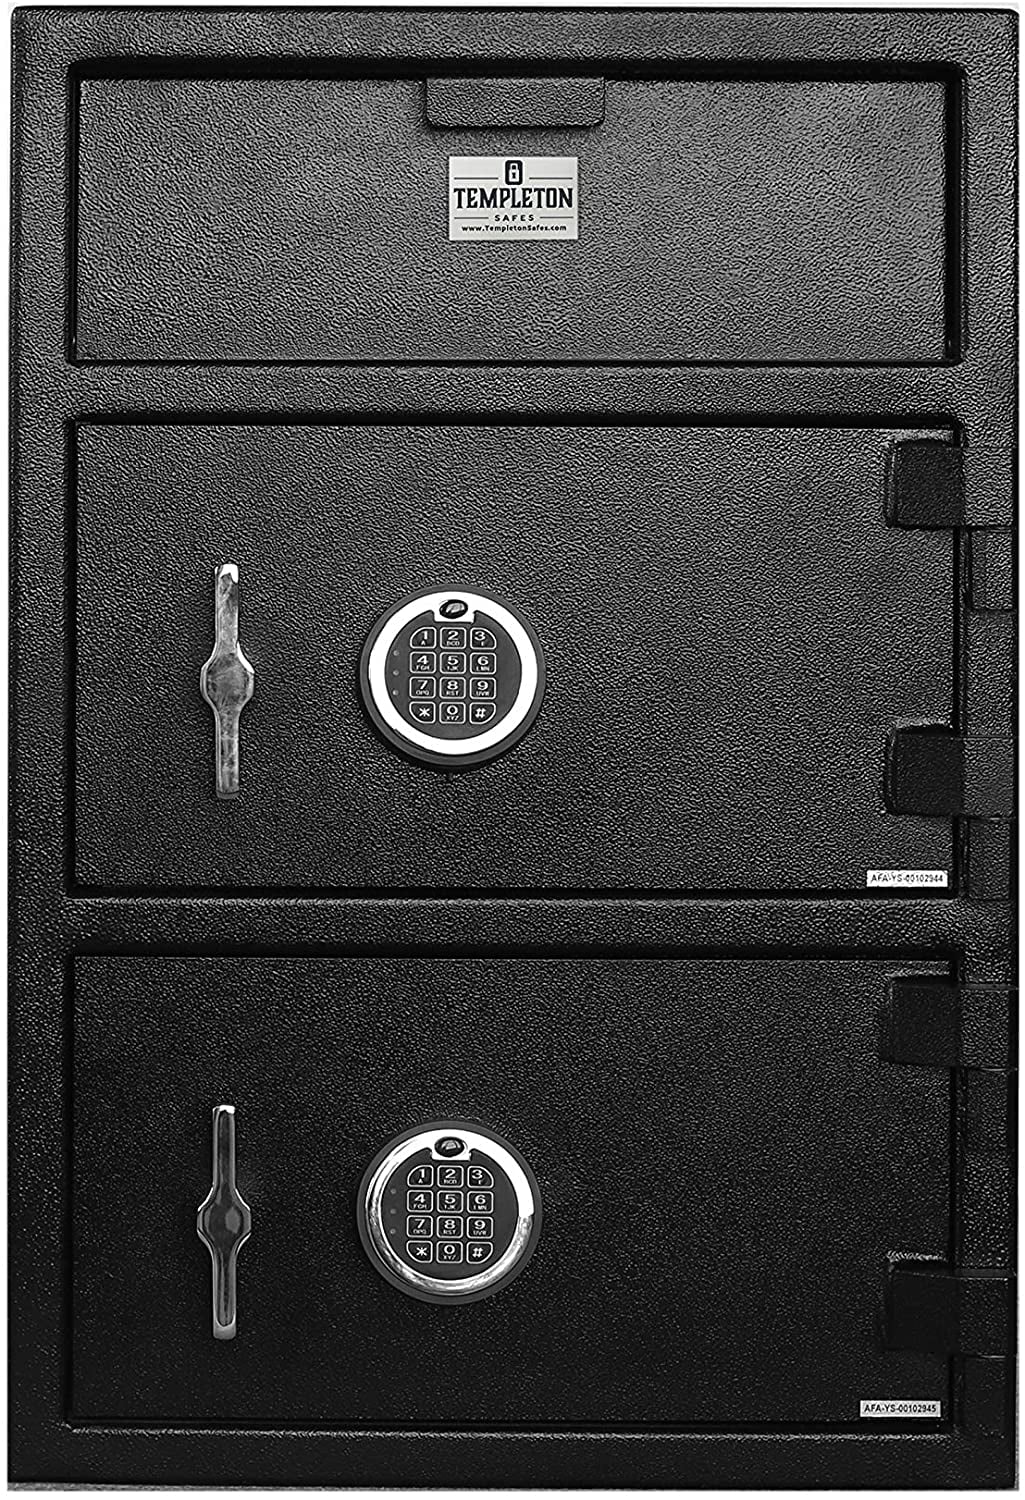 Urban August Dual Combination & Keyed Lock box - Lockable Box for Everyday  Use - Multi-Purpose lock for Home & Office Safety - Made of